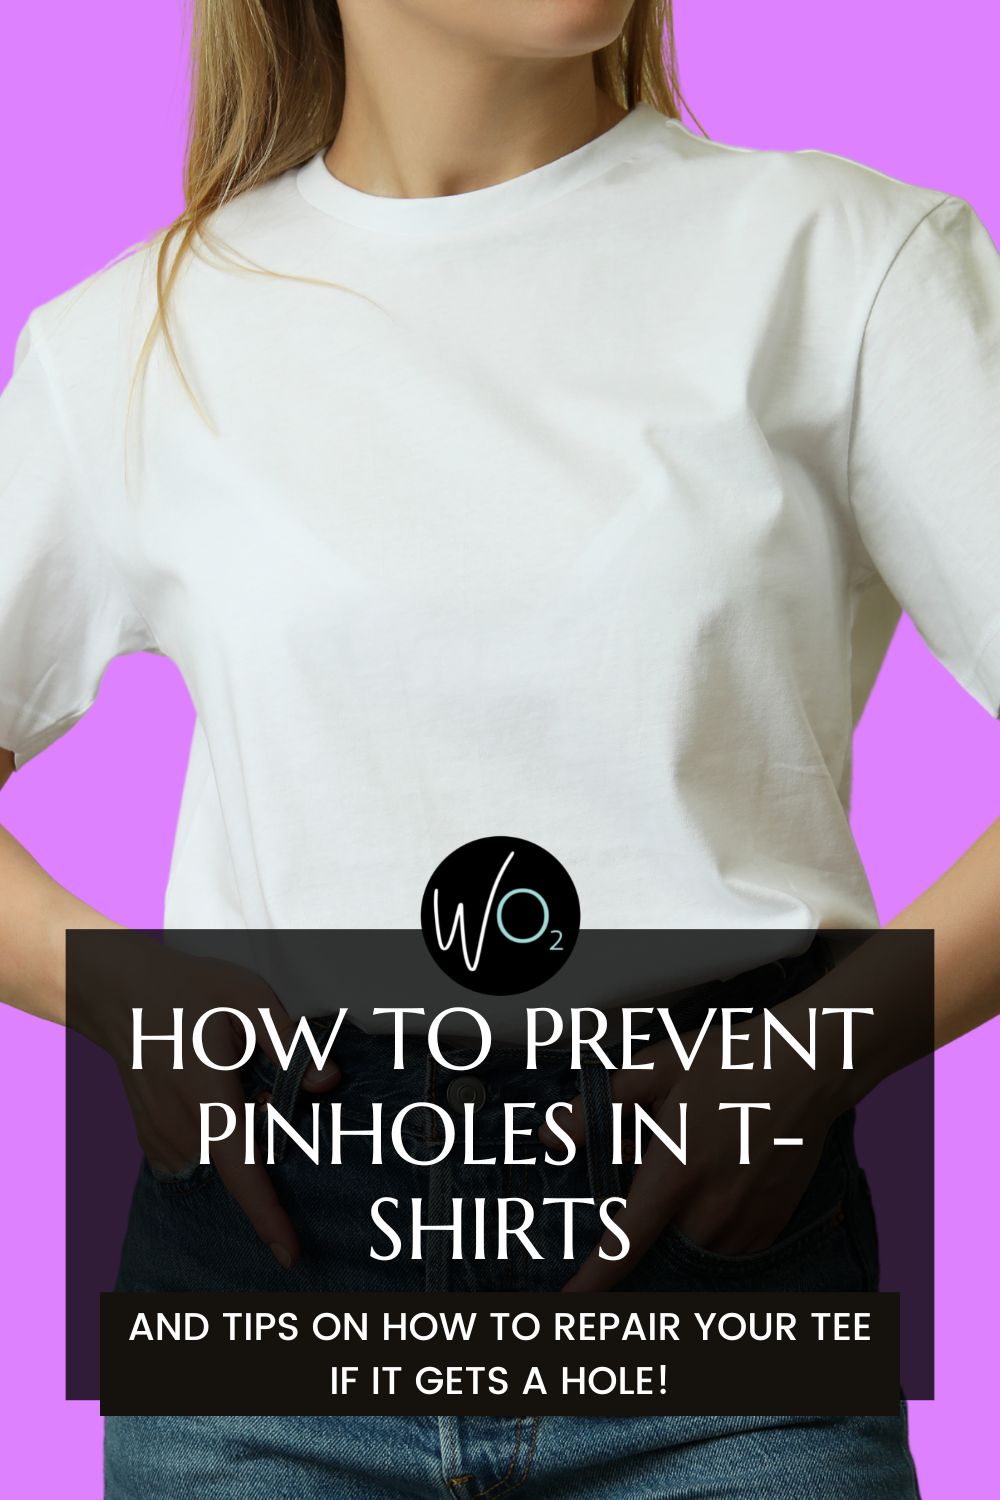 How to Prevent Pinholes in T-Shirts Near your Belly Button (And How To Repair such Holes in Your Tees)